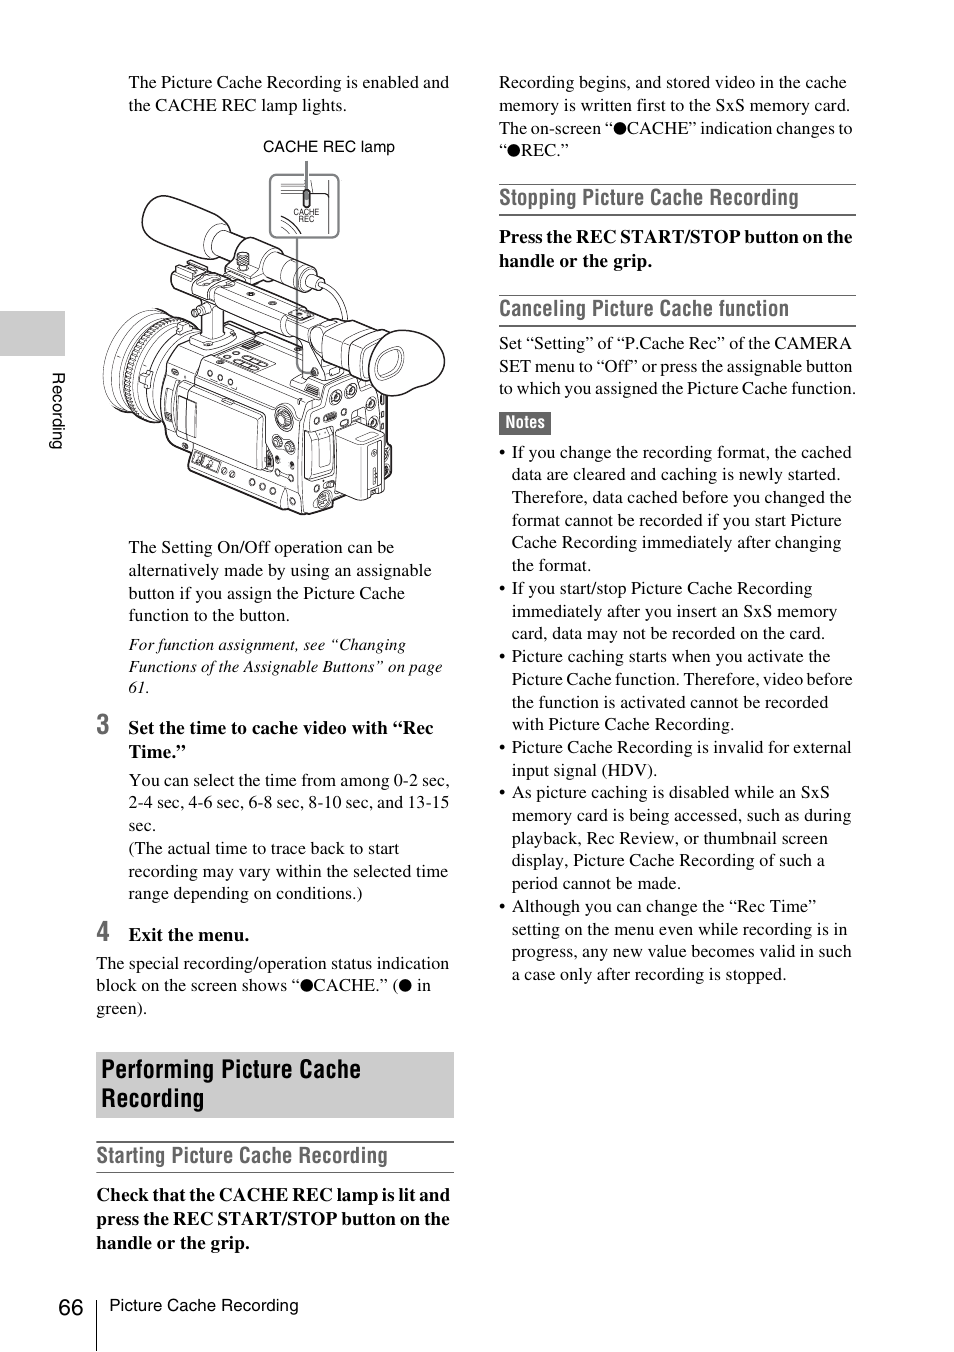 Performing picture cache recording, Starting picture cache recording, Stopping picture cache recording | Canceling picture cache function | Sony PMW-F3K User Manual | Page 66 / 164